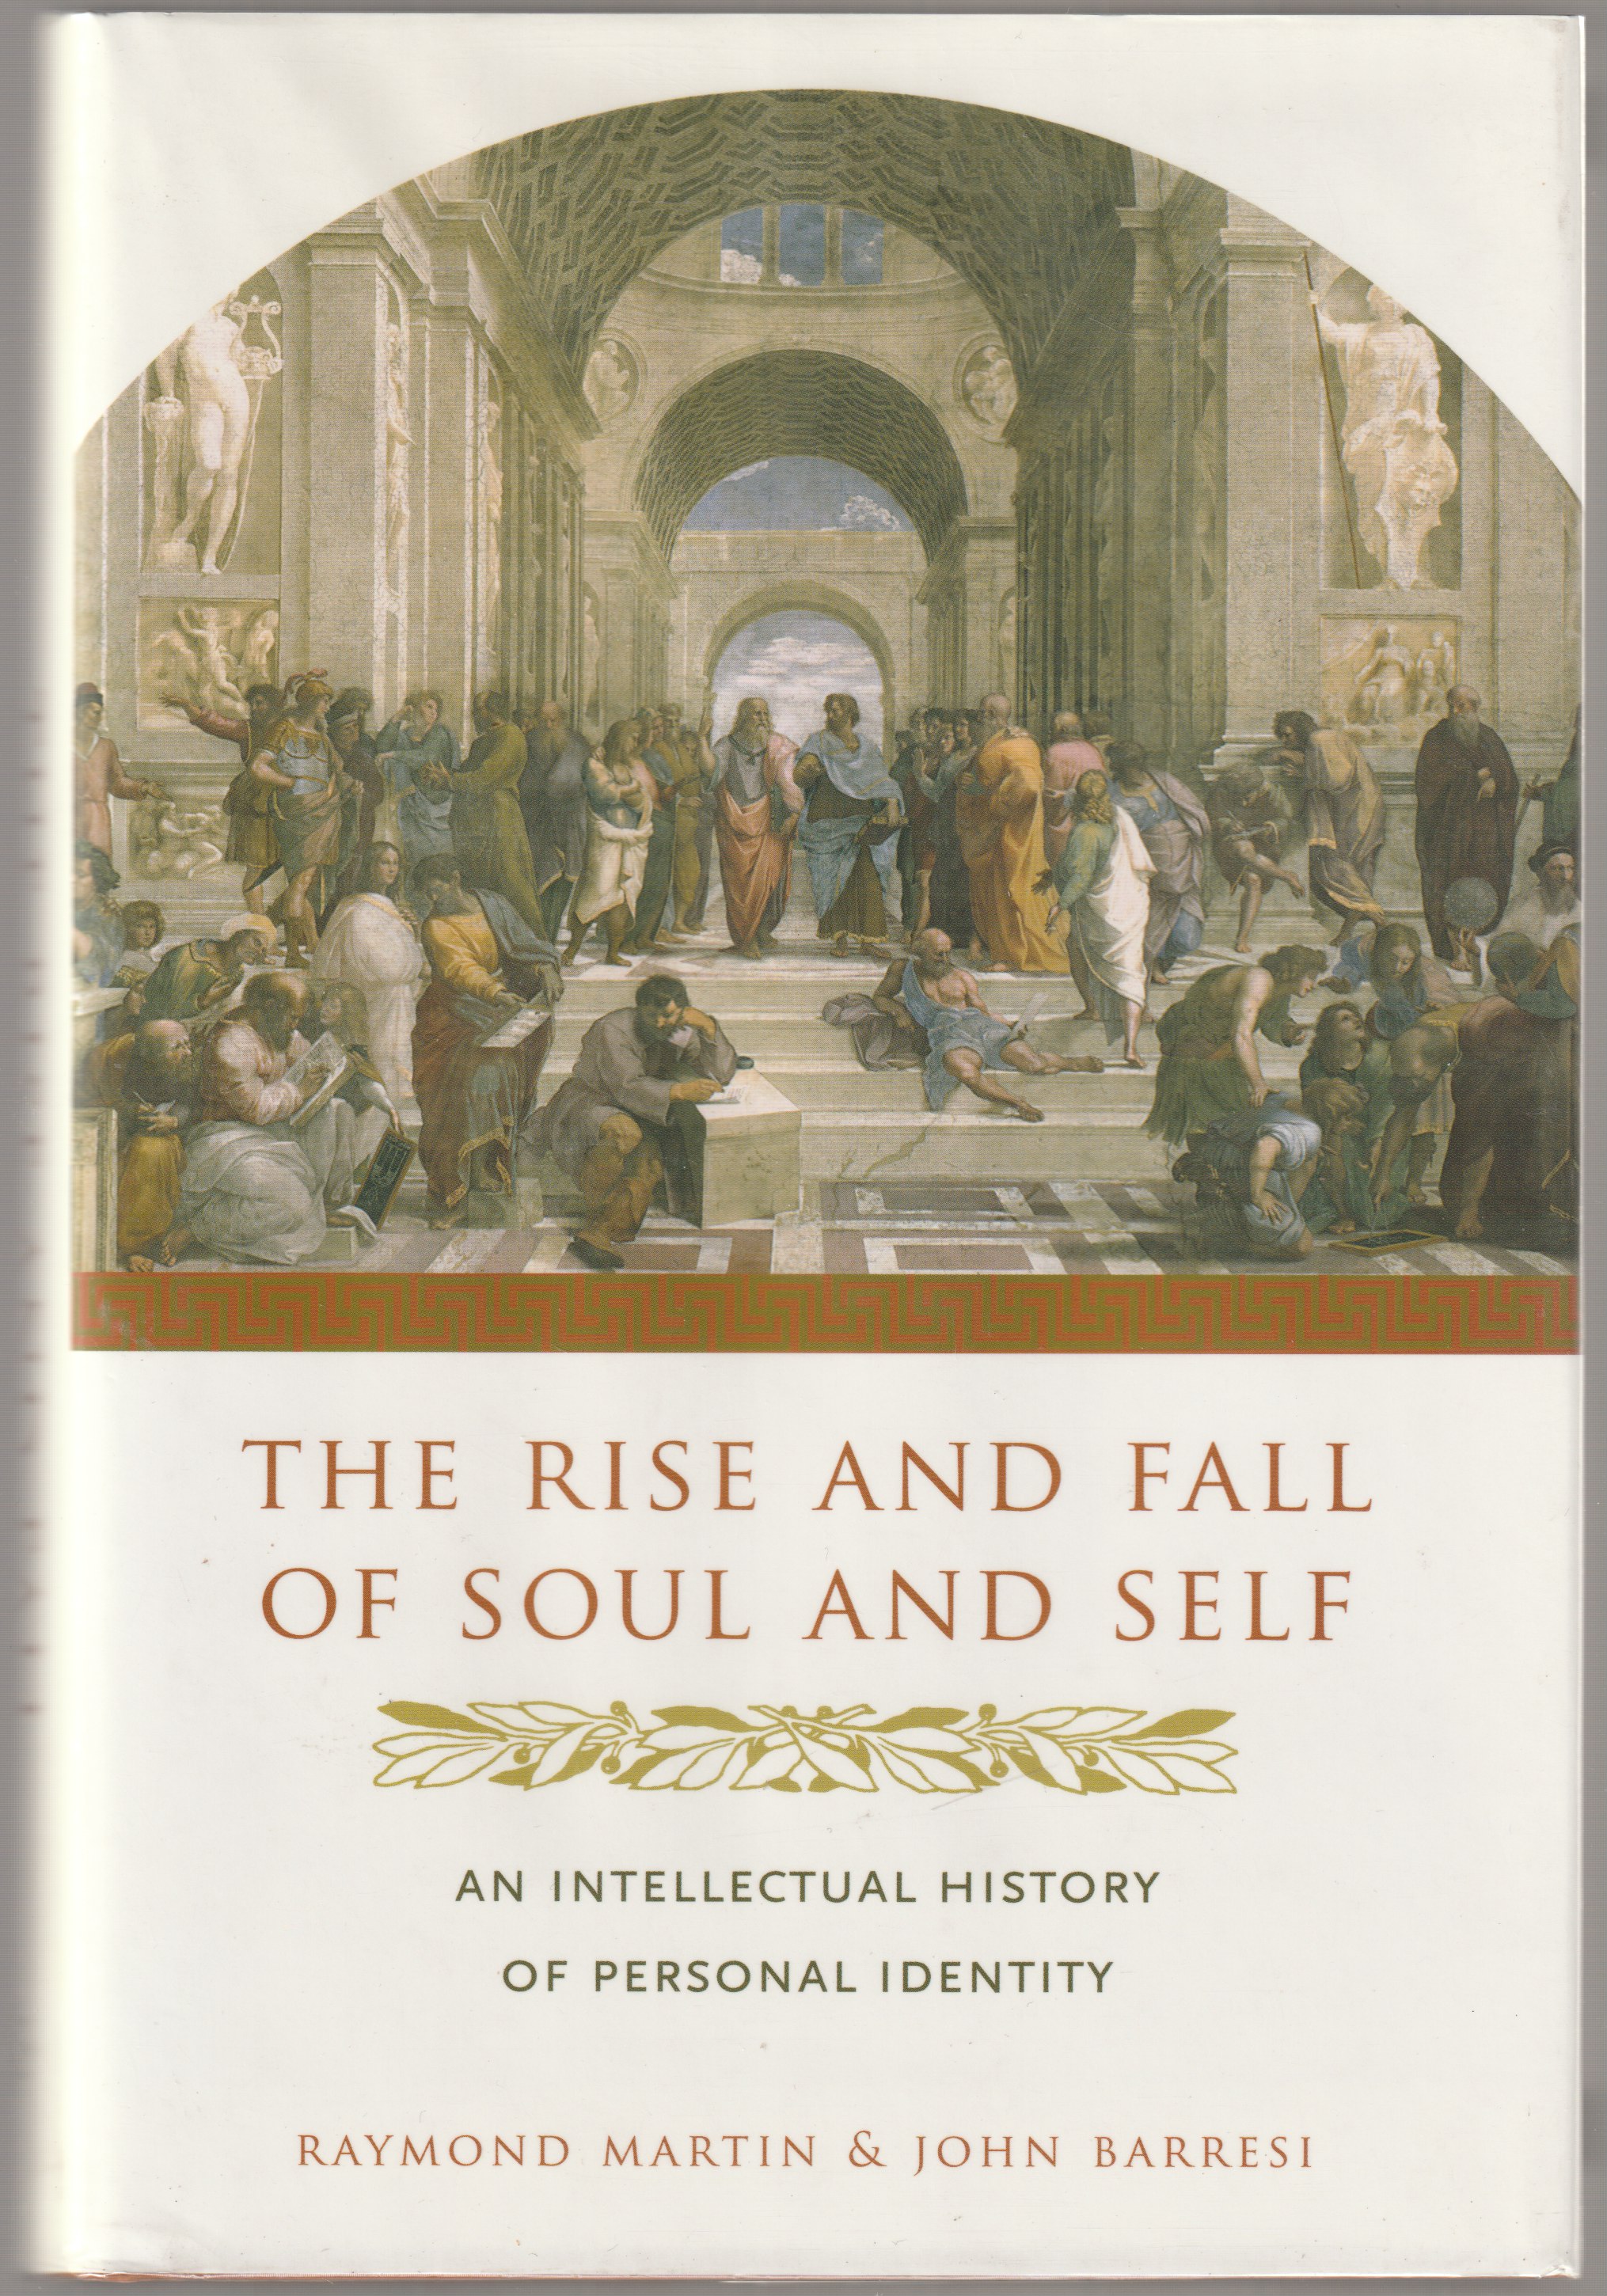 The rise and fall of soul and self : an intellectual history of personal identity.